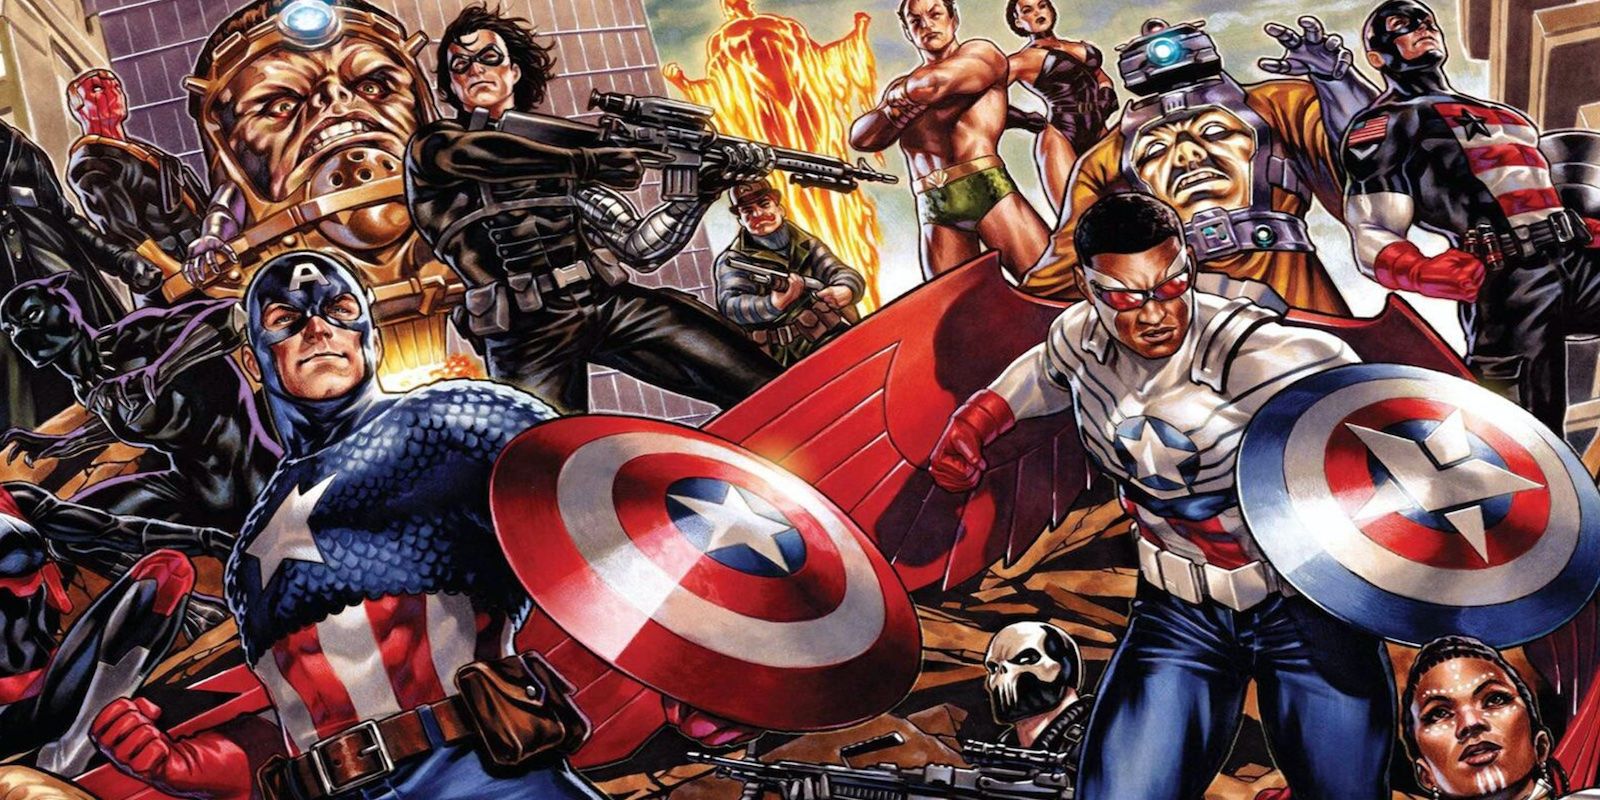 Steve Rogers and Sam Wilson, two Captain Americas accompanied by a host of other Marvel characters.